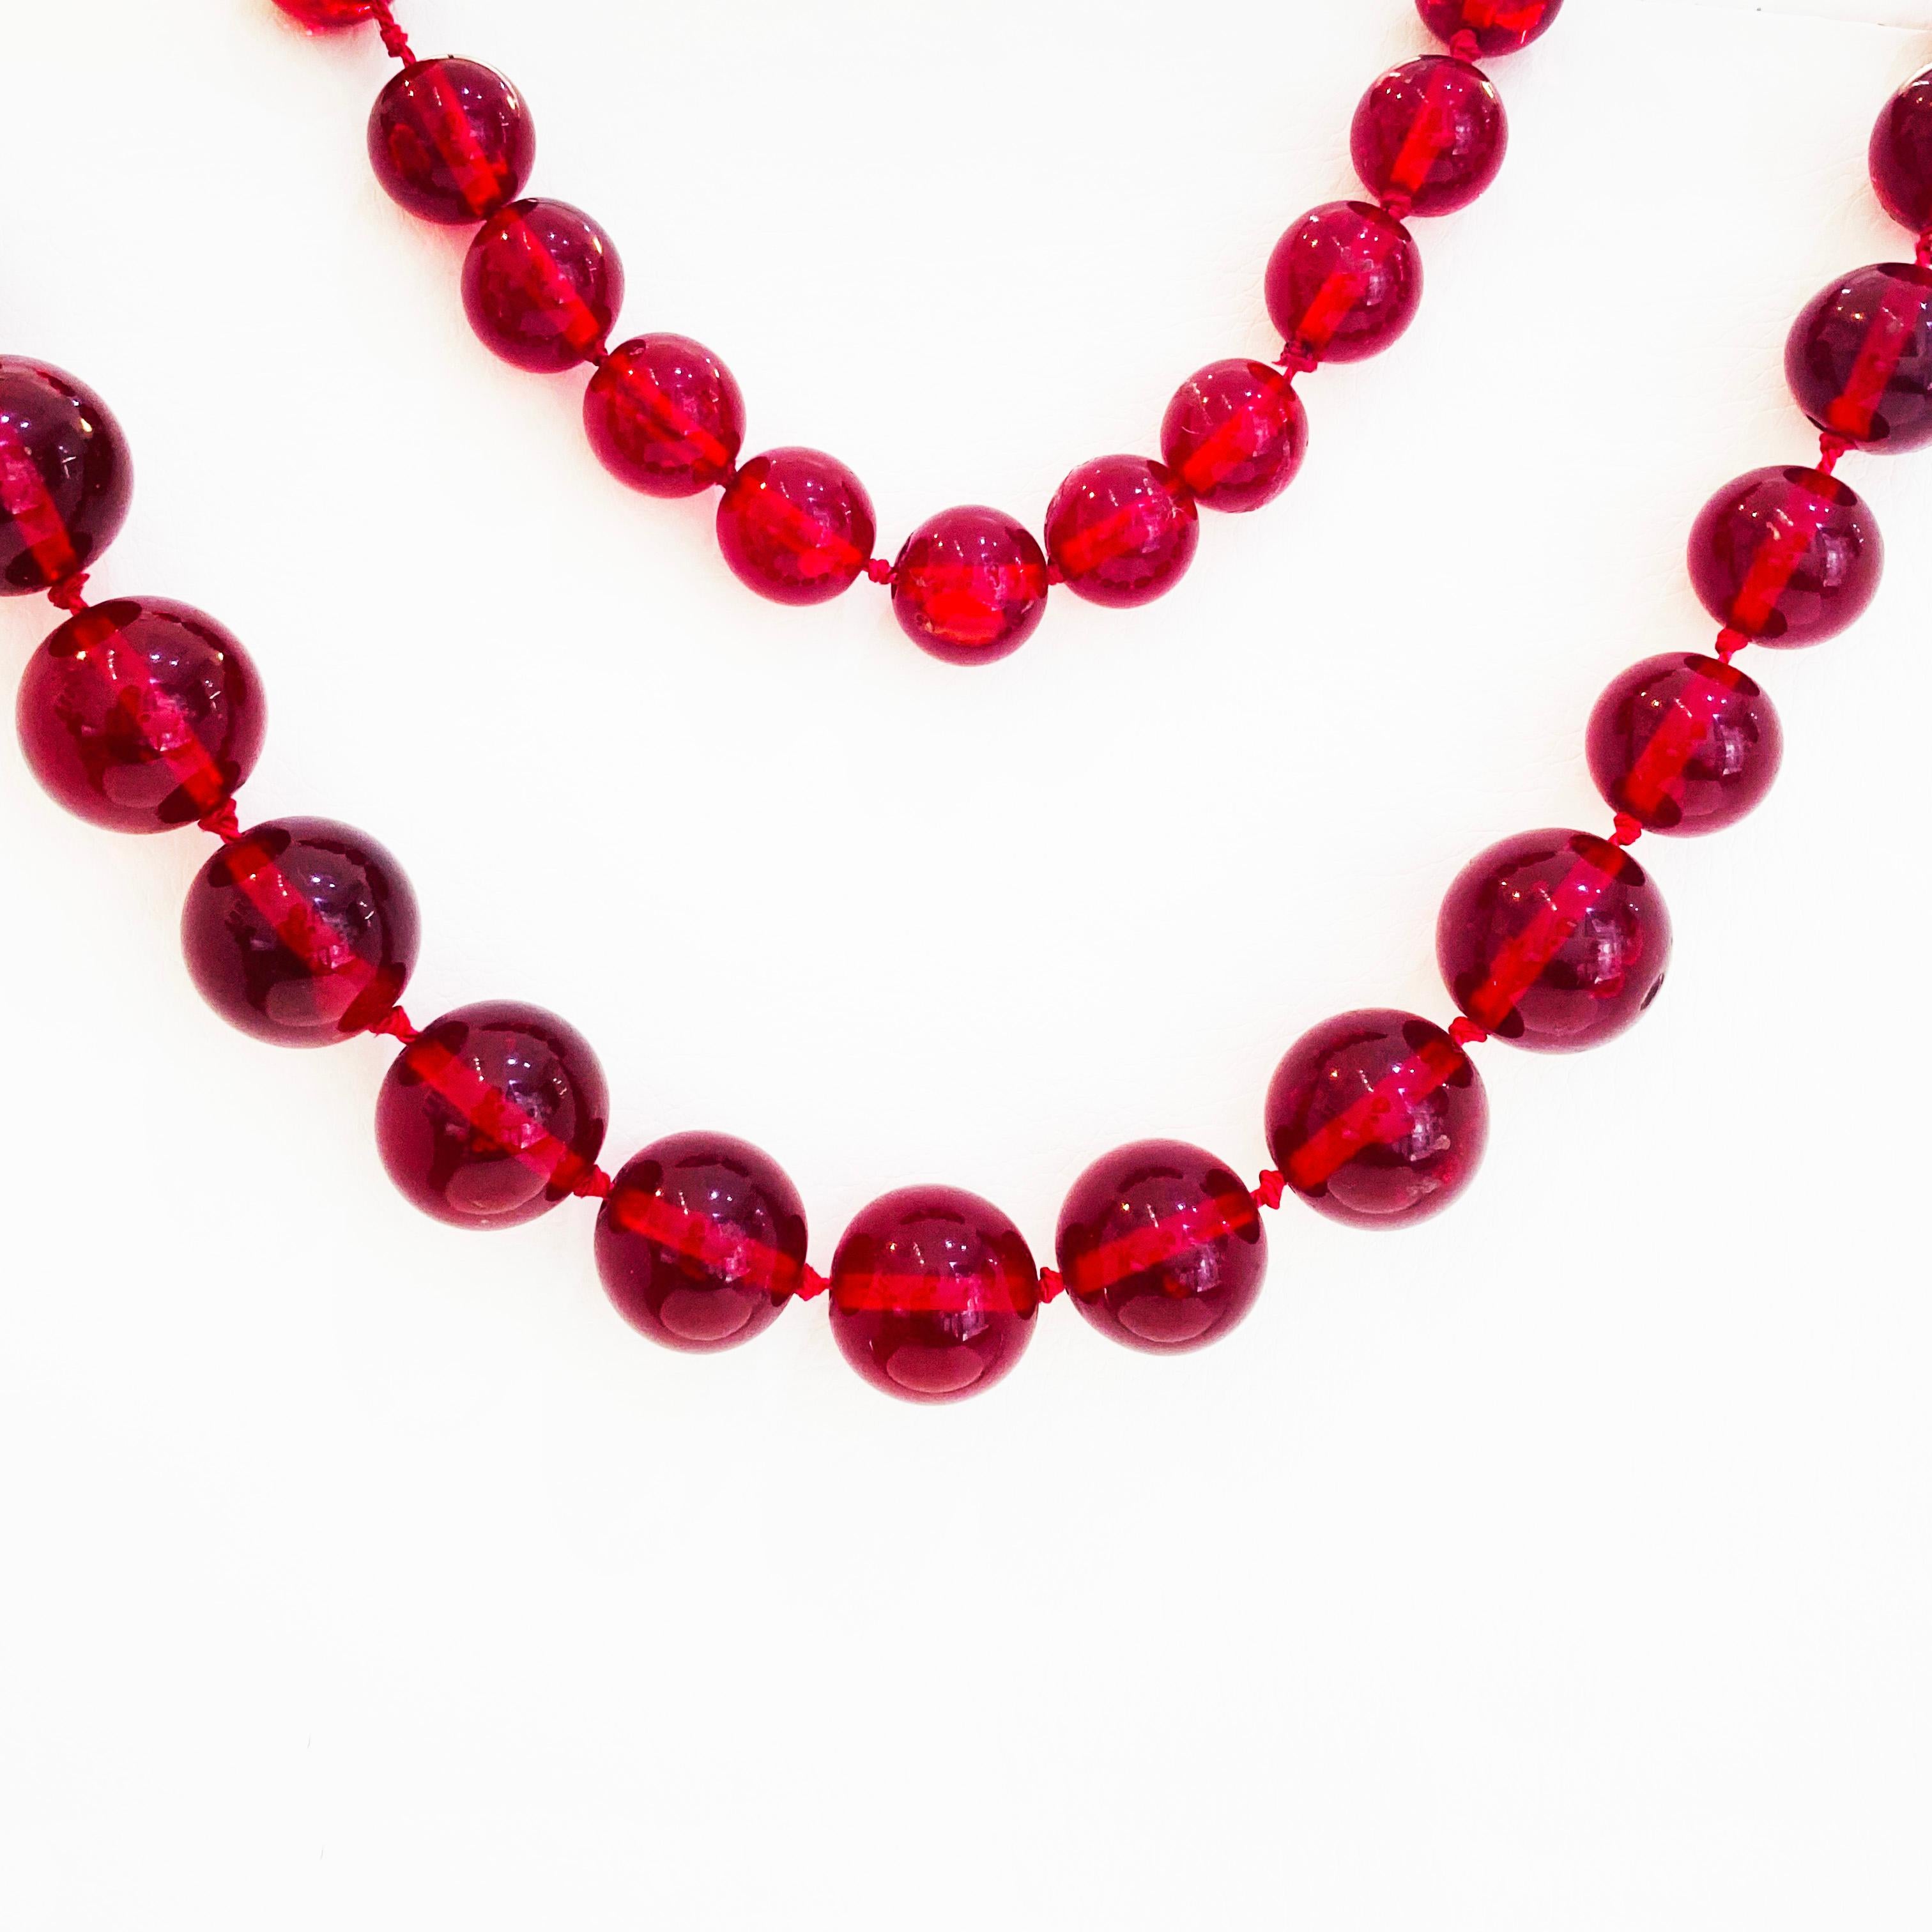 These authentic Baltic amber are a beautiful cherry color and look gorgeous on anyone!  They are large at 12.5 millimeters round amber beads to the largest 18.5 millimeters.  The necklace is strung on a gorgeous red silk thread with infinity